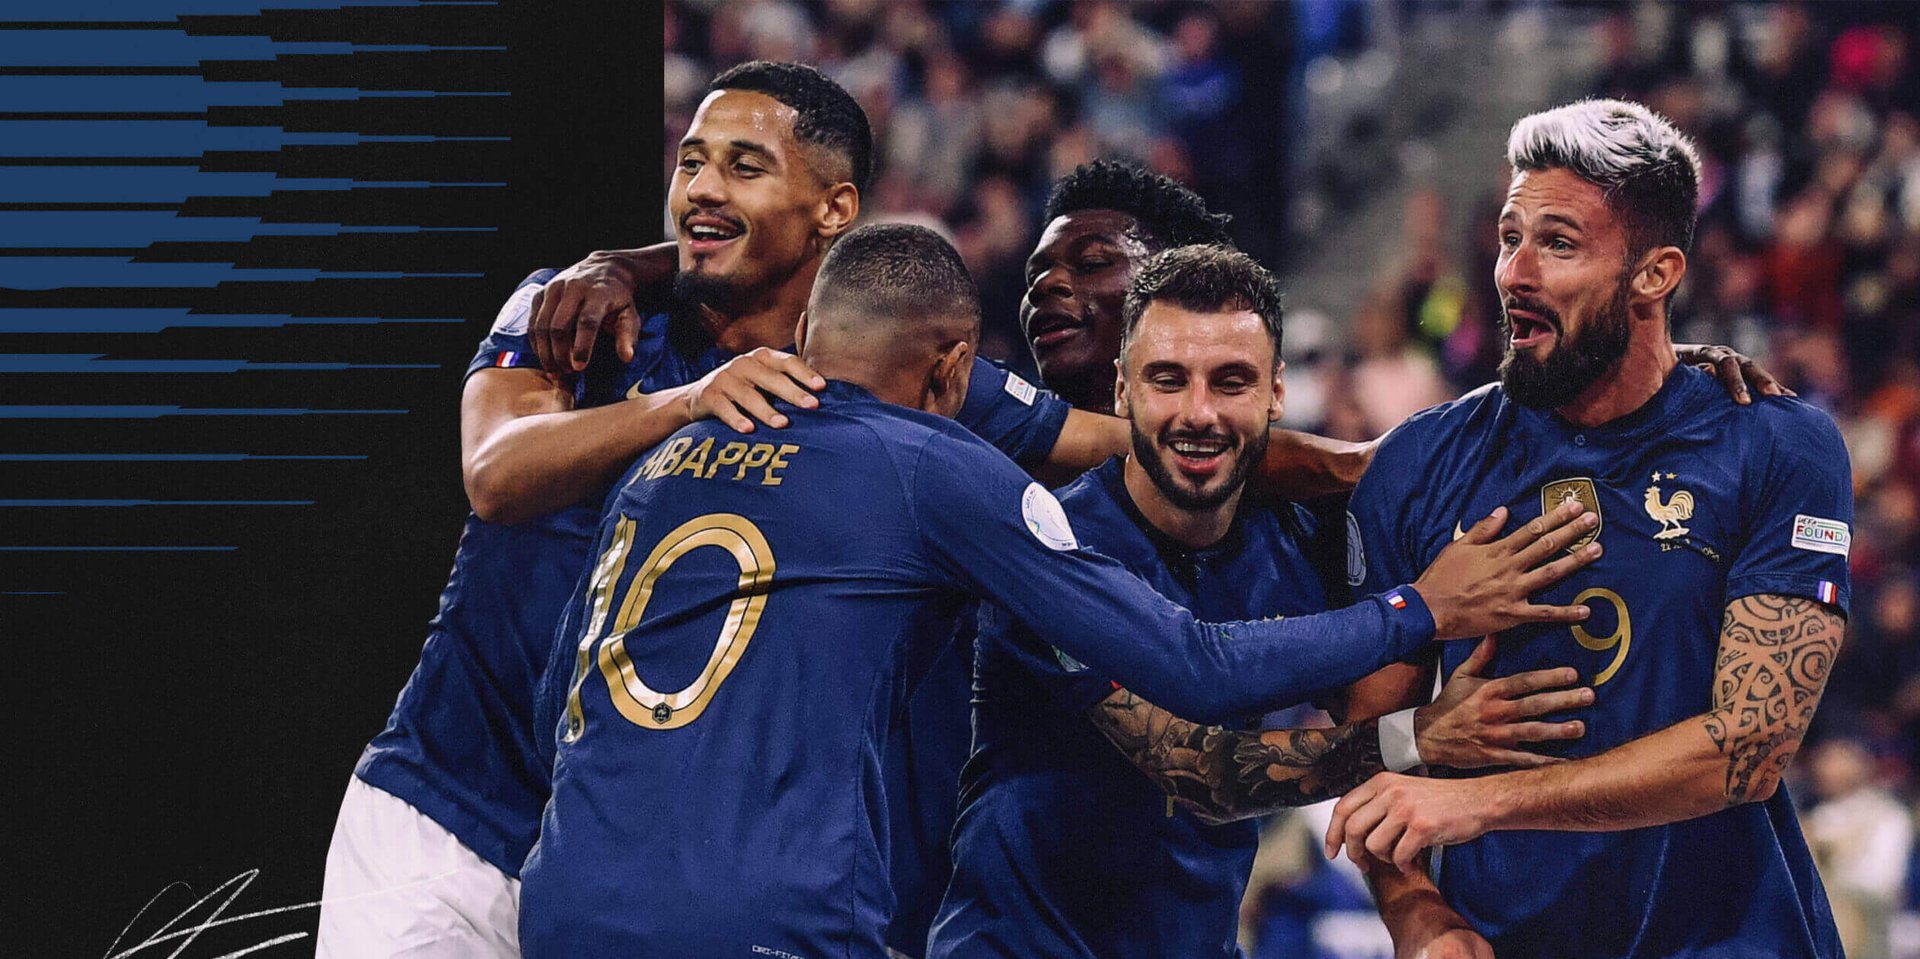 France 2022 World Cup squad guide: The orange team were due to advance or go home early again